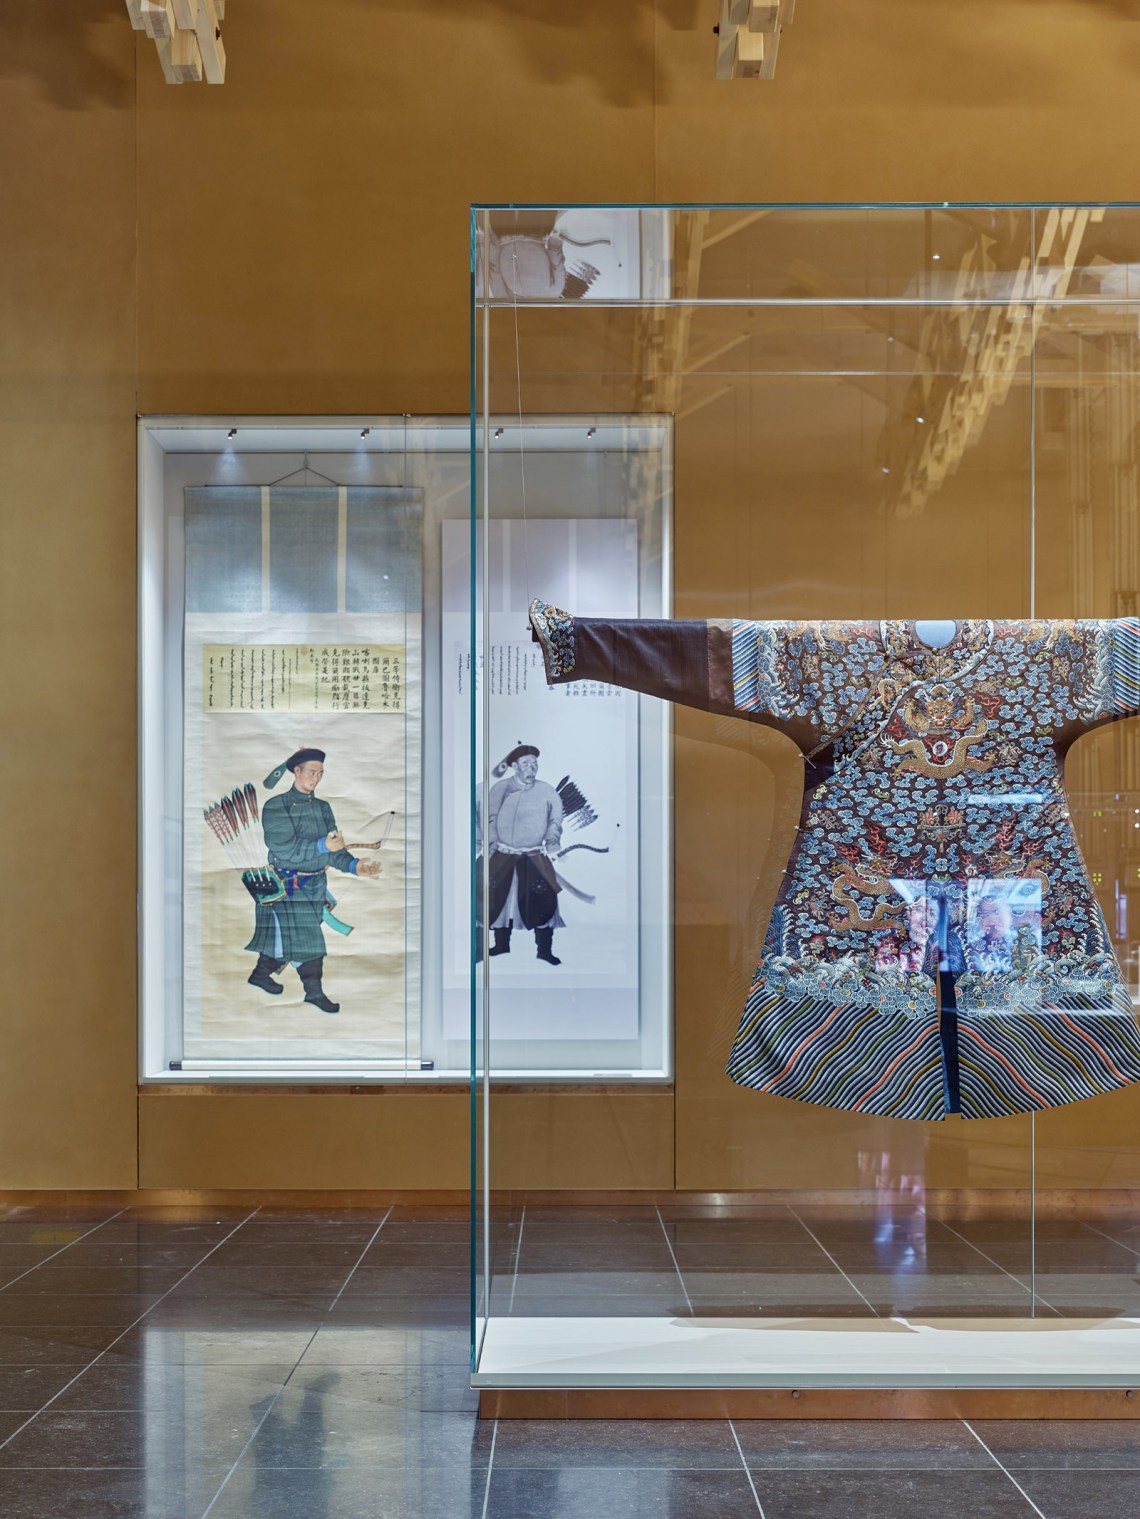 Objects on view as part of the ‘China and Europe: Art Between War and Peace’ exhibit at the Museum of Asian Art in the Humboldt Forum